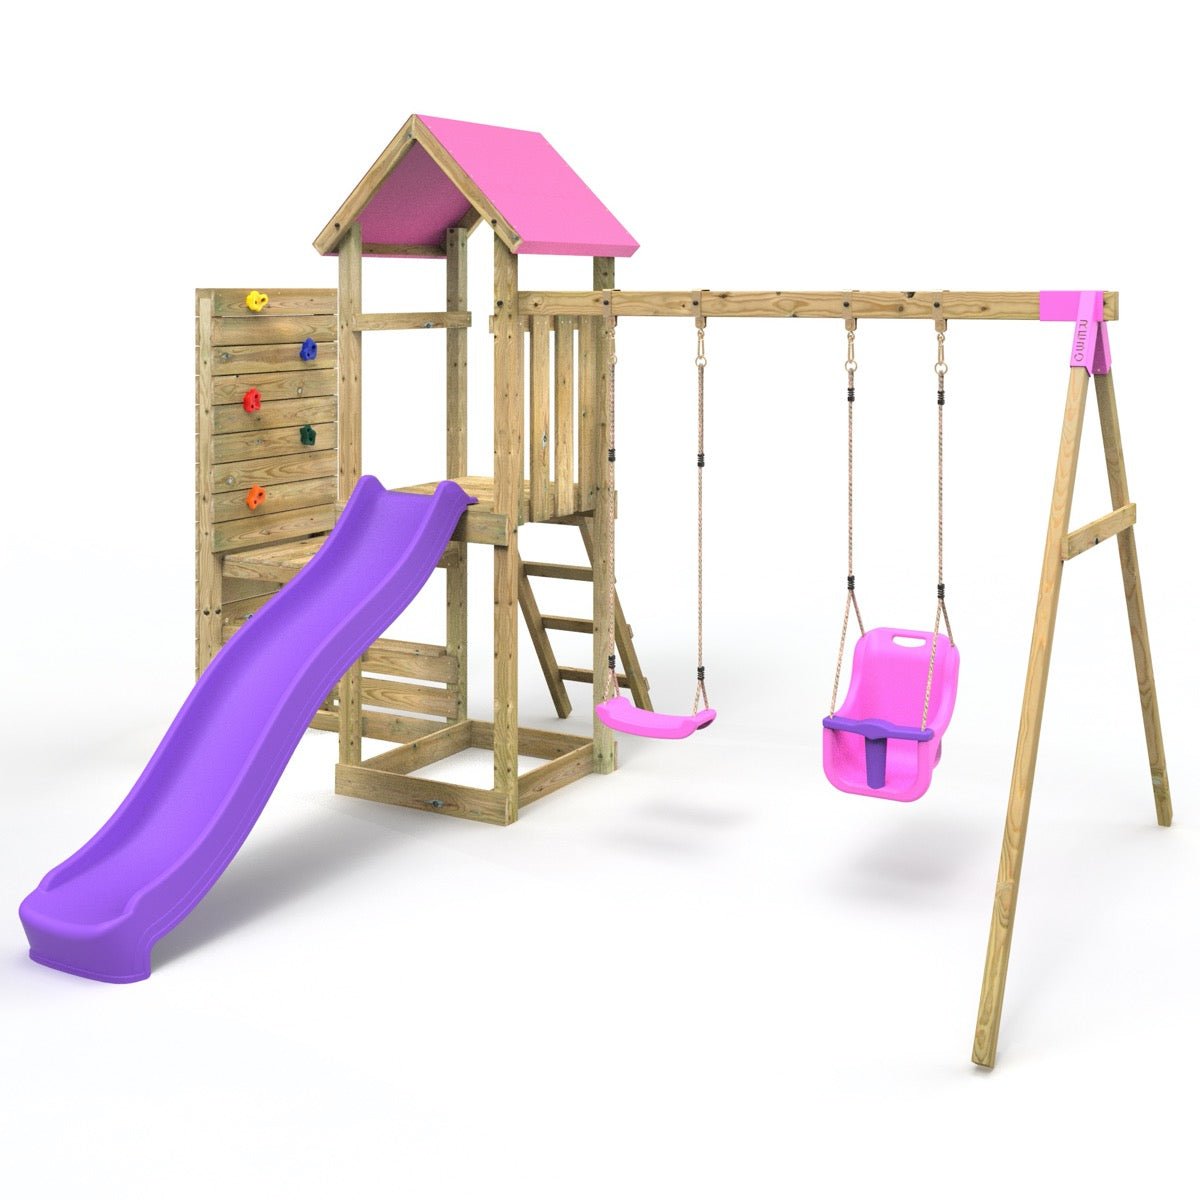 Rebo Wooden Climbing Frame with Vertical Rock Wall, Swing Set and Slide - Rainier+ Pink